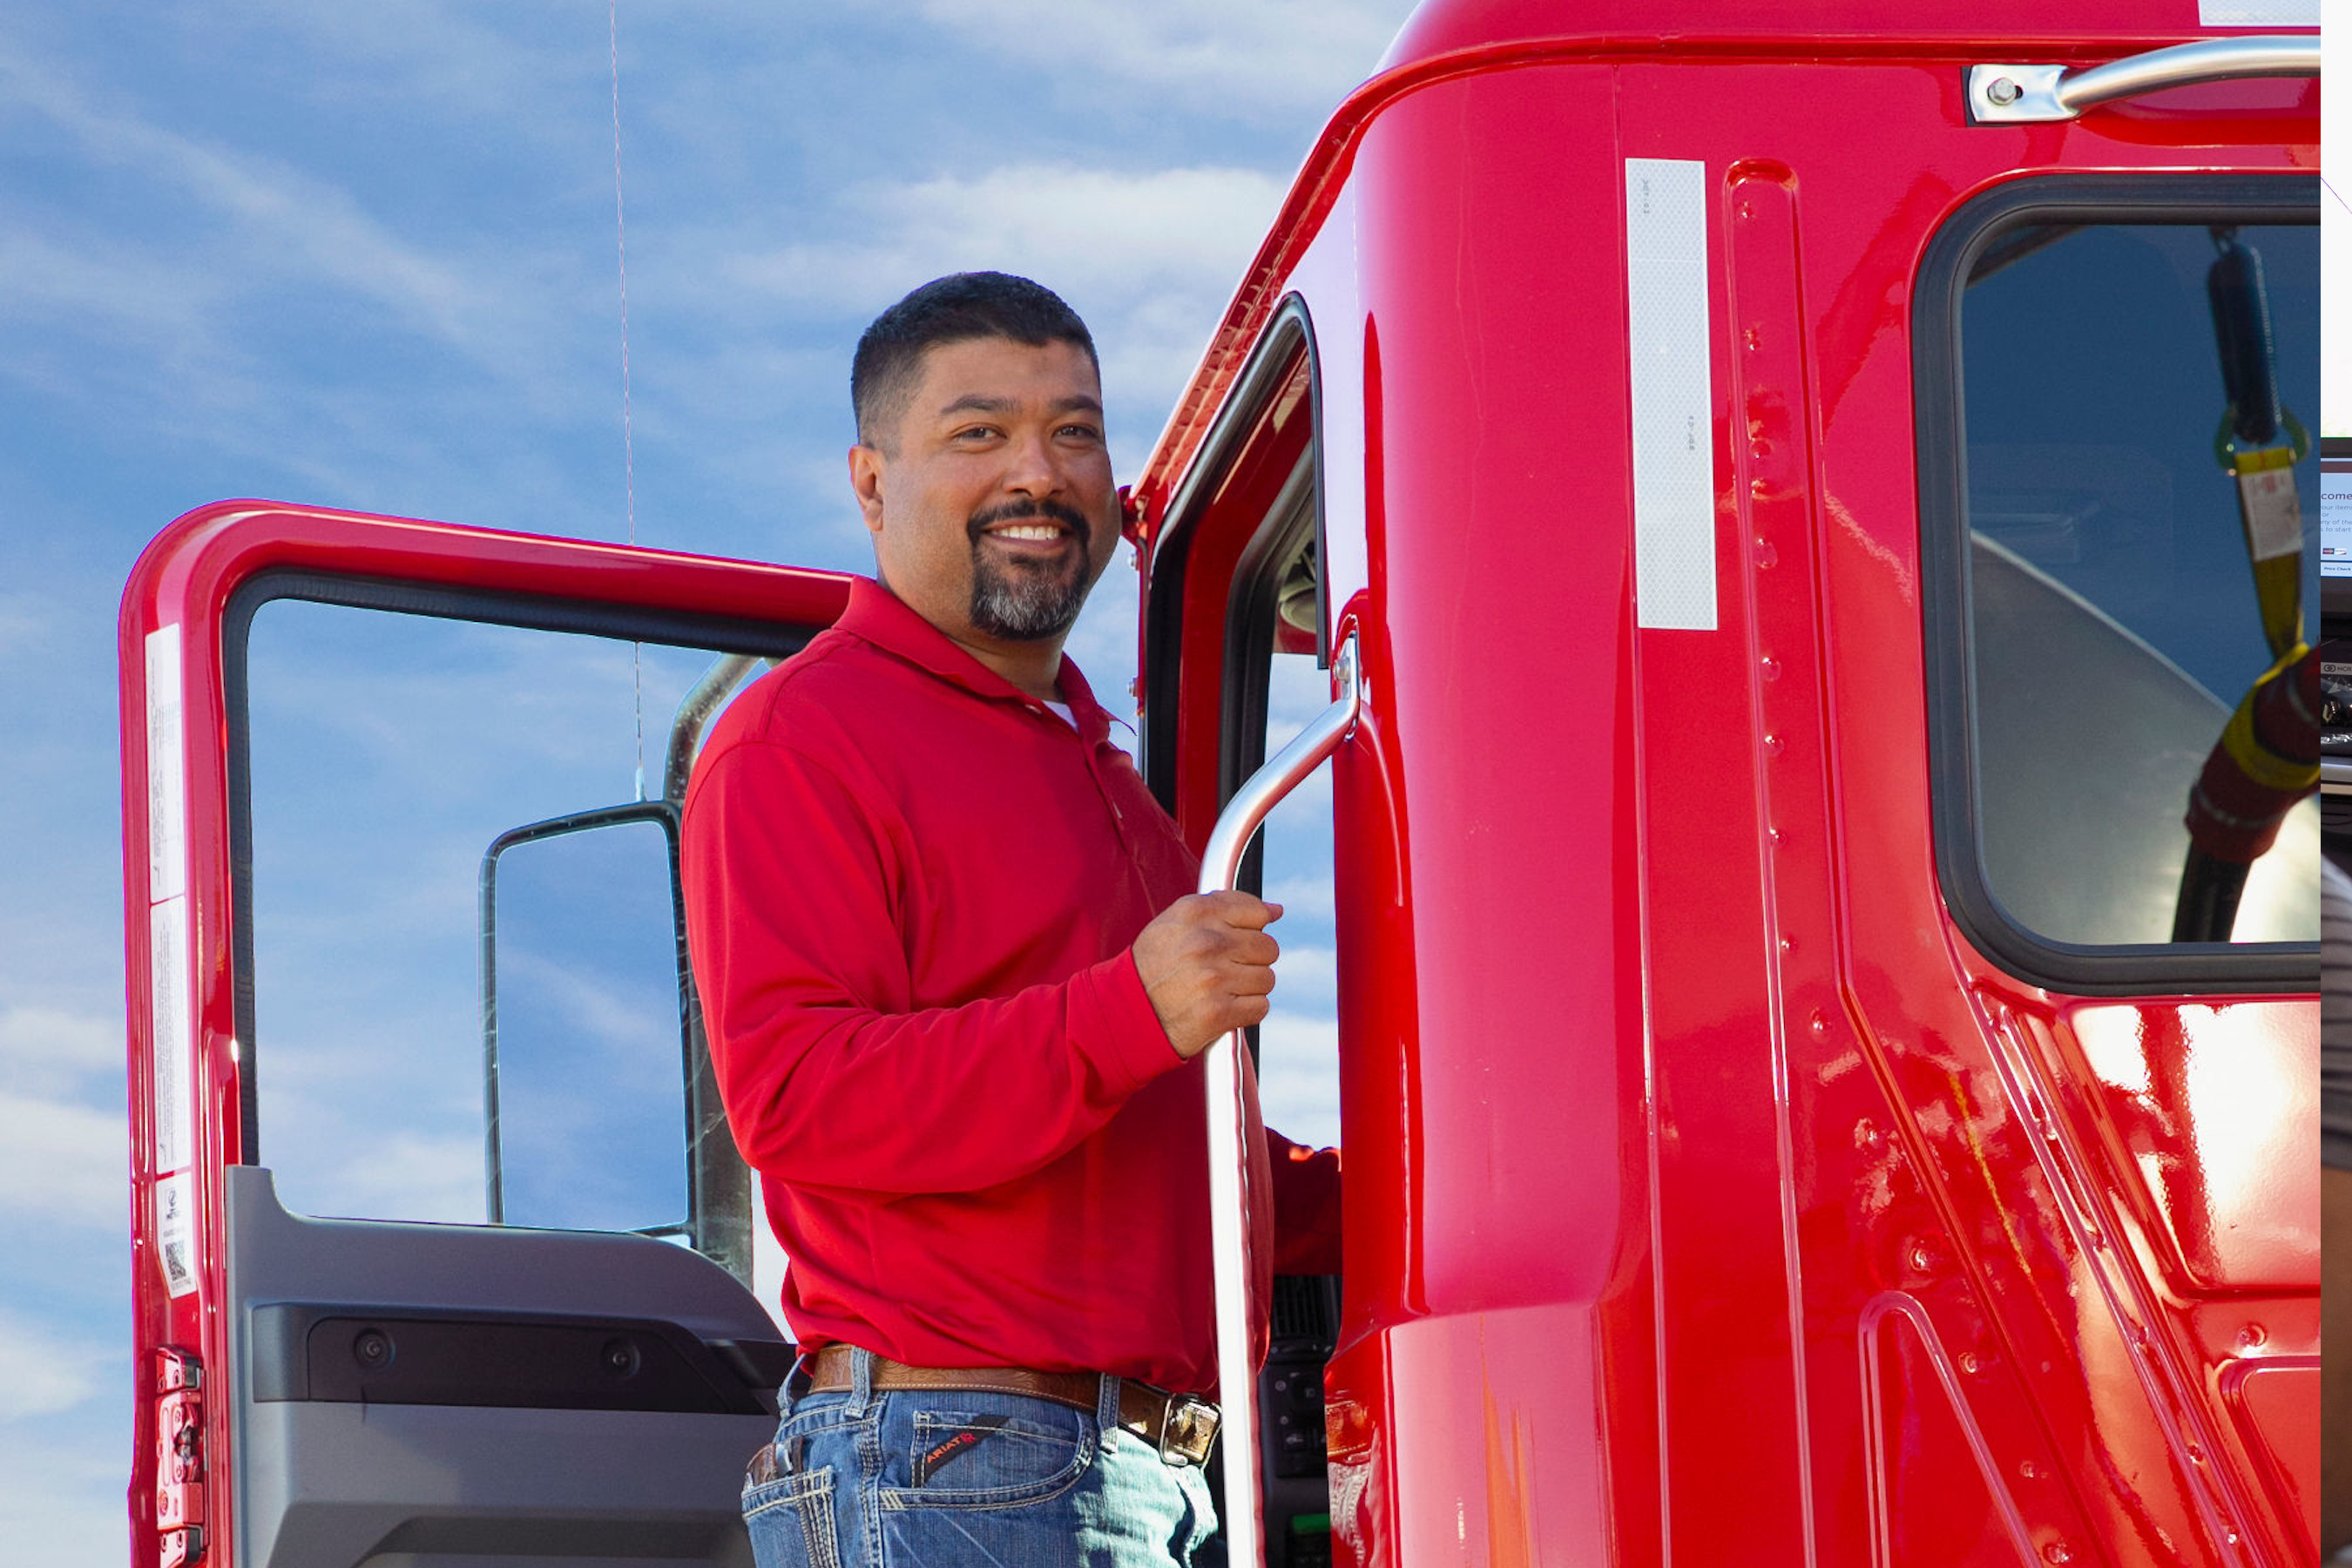 The company is hiring more than 300 professional drivers for company and independent contractor positions across the country.